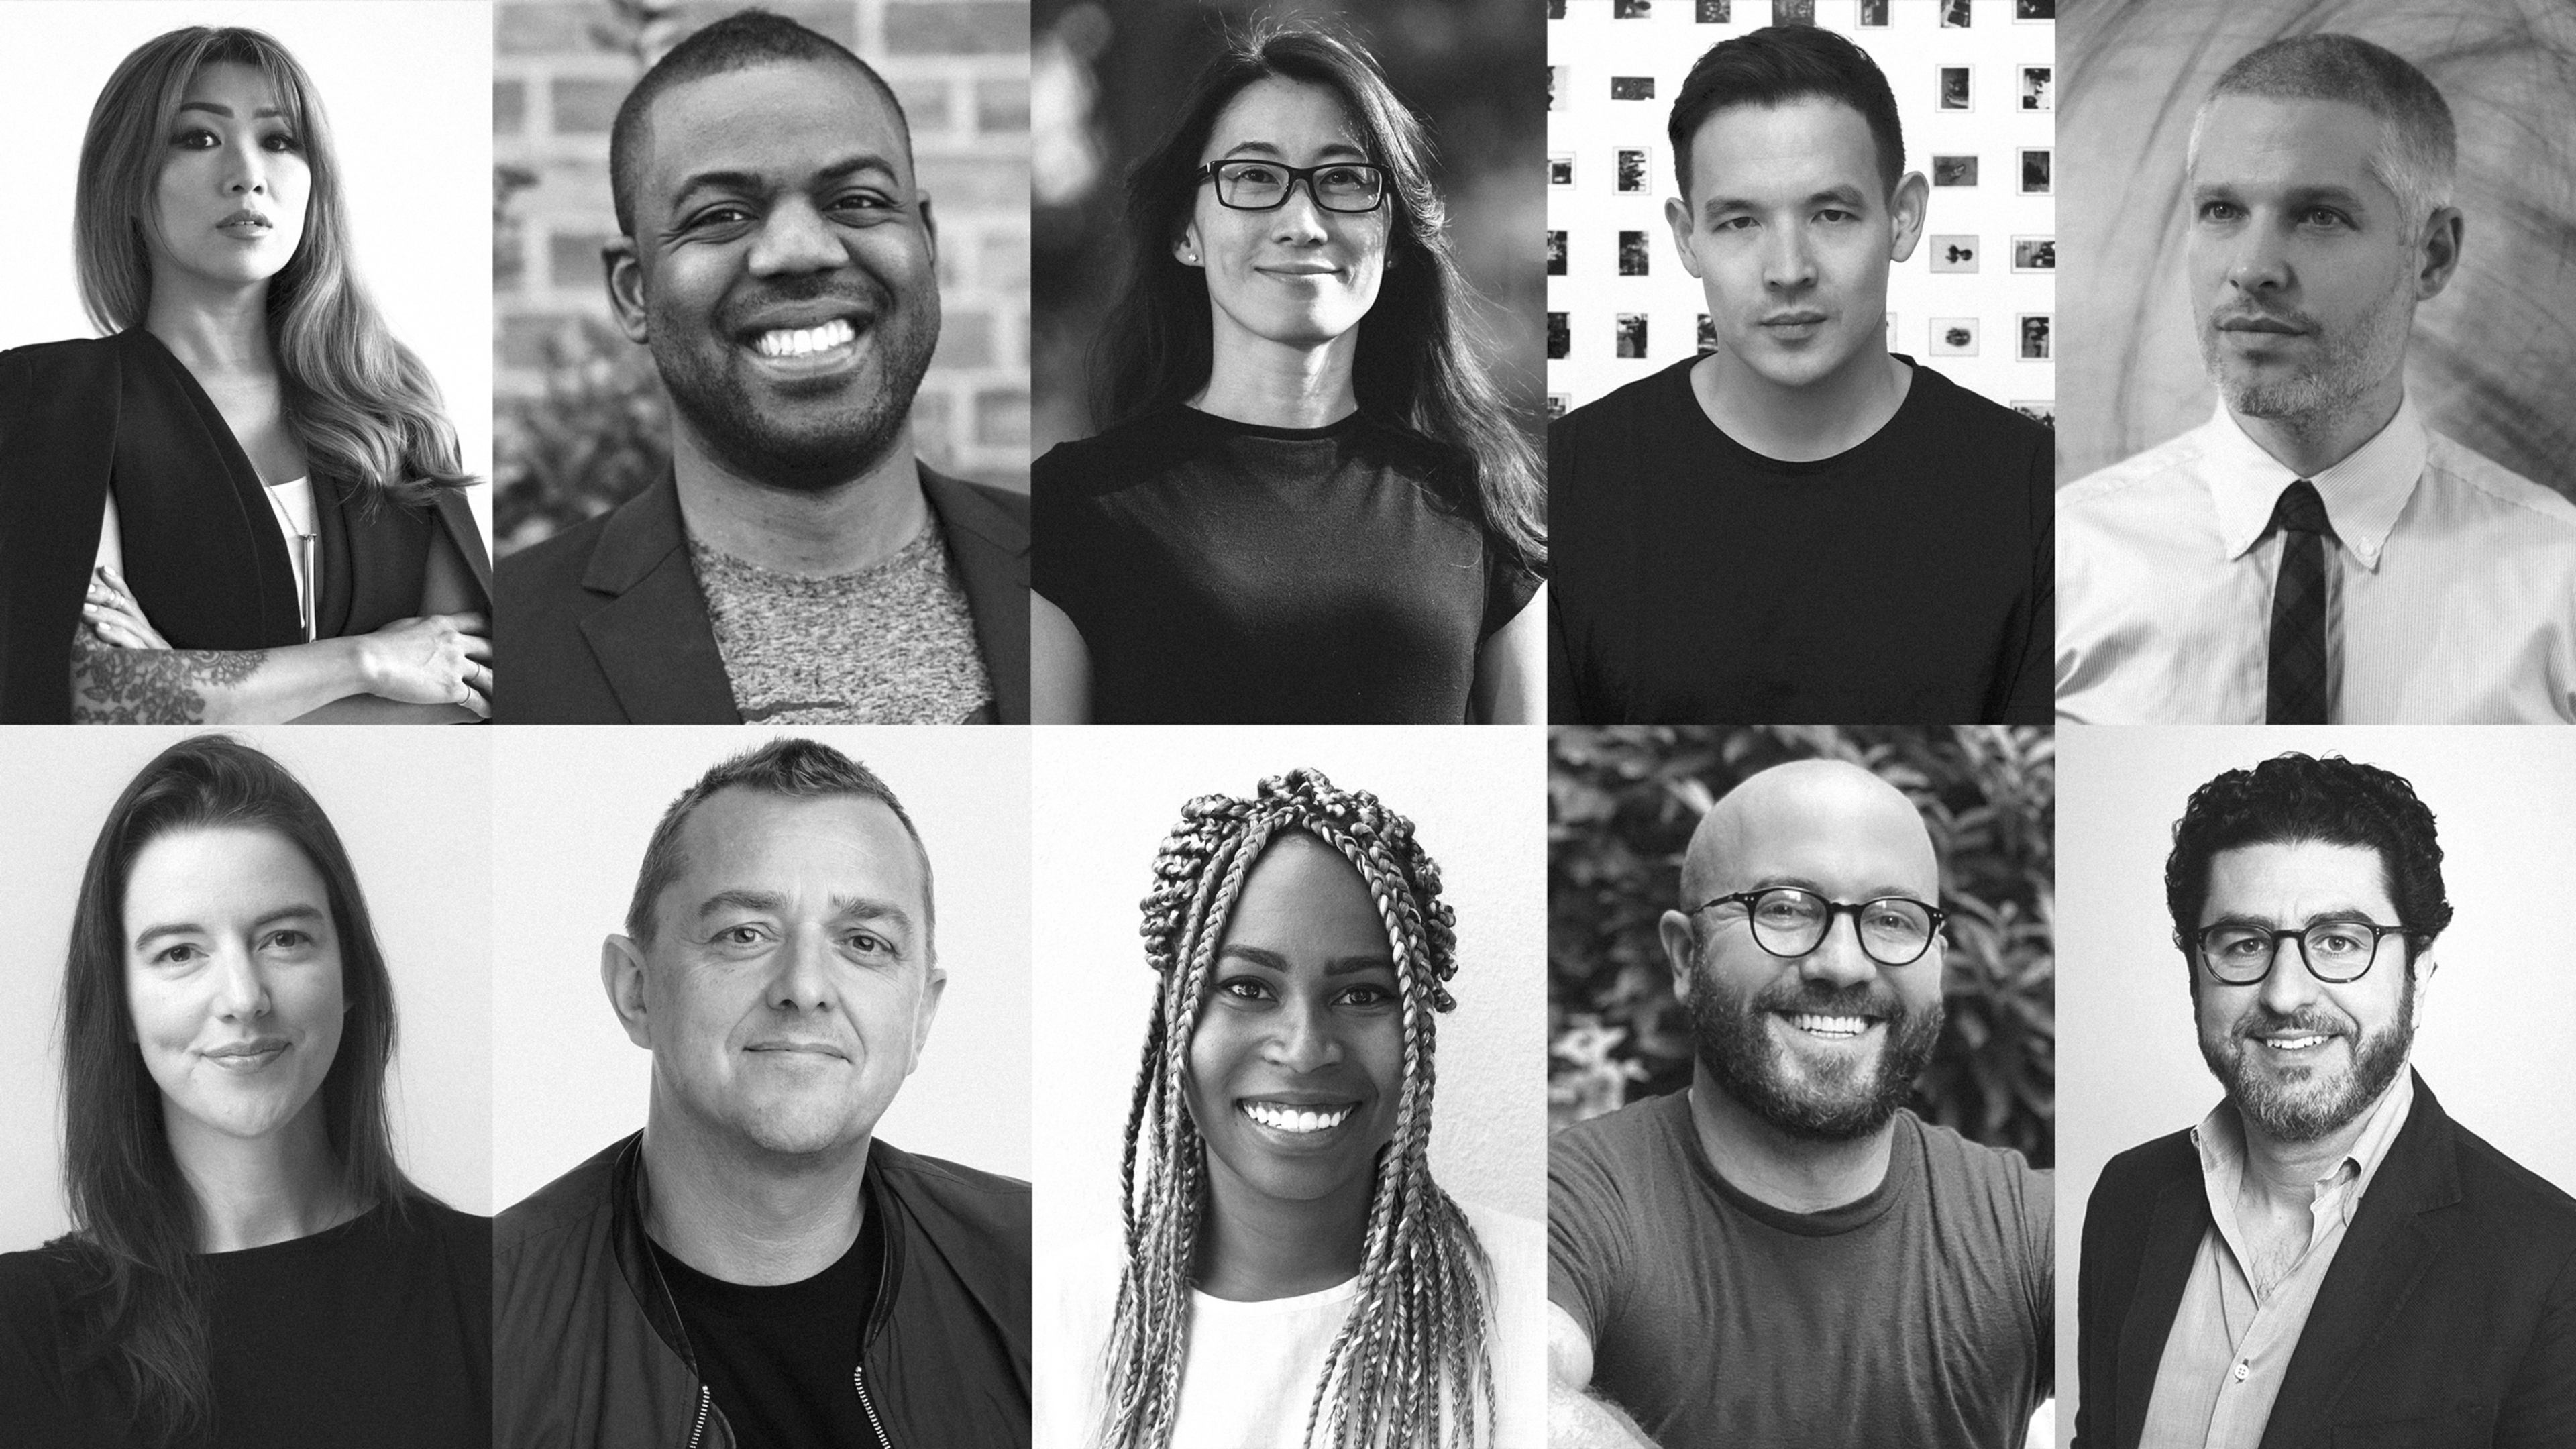 Meet the jurors of the 2022 Innovation by Design Awards